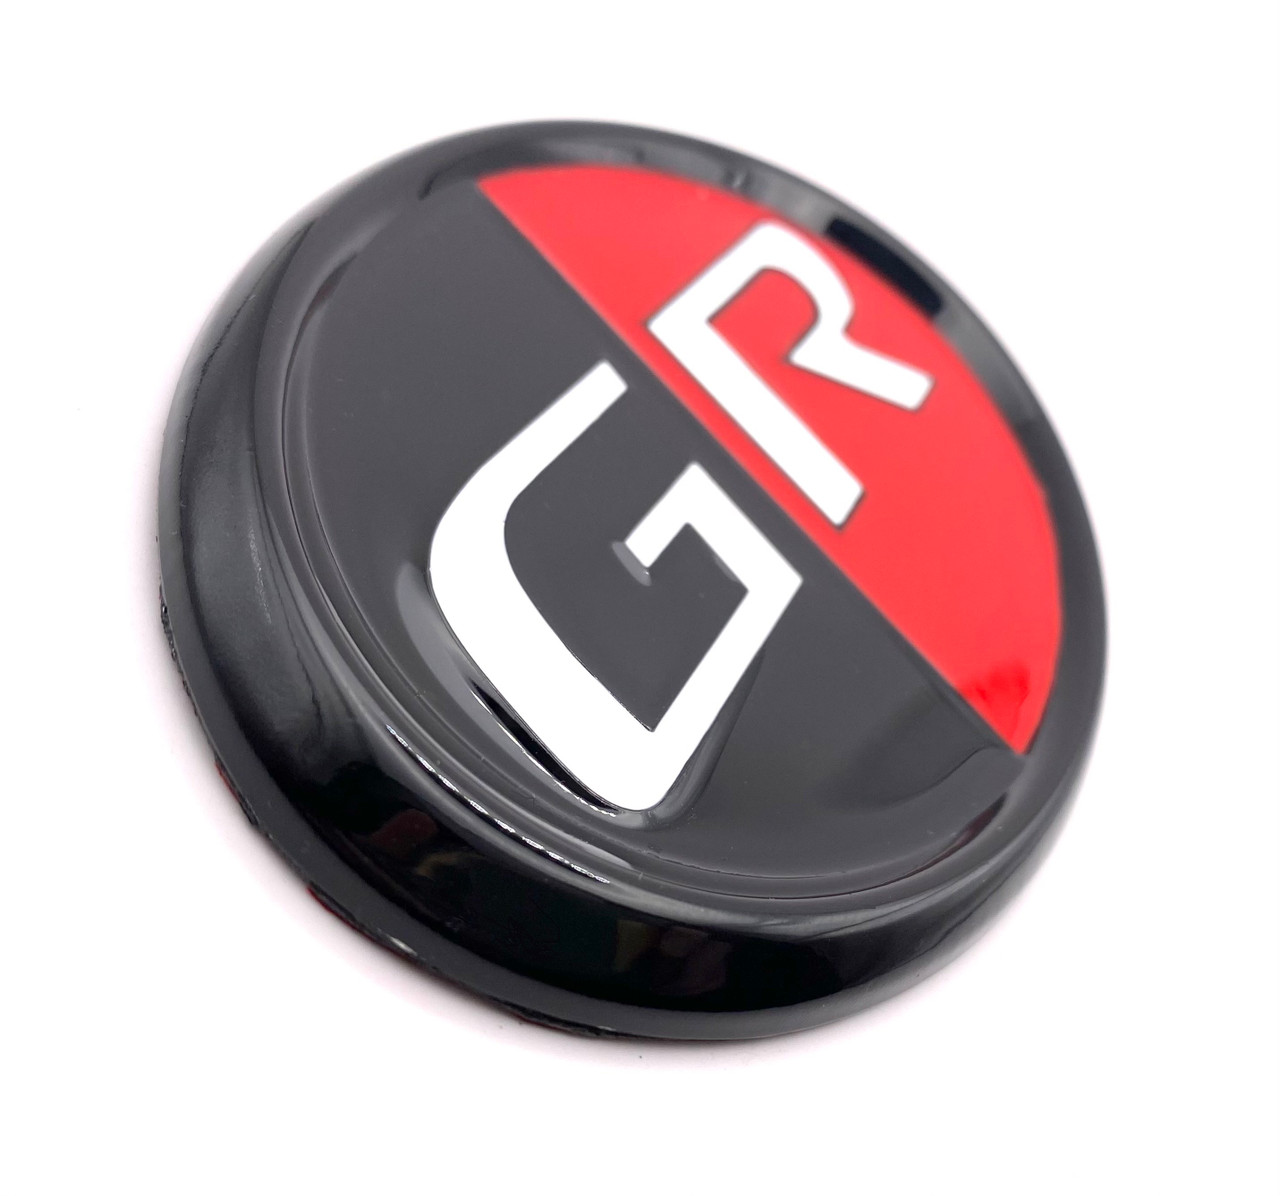 GR Oval Replacement Badge Front/Rear for GR86 / SUPRA / COROLLA 